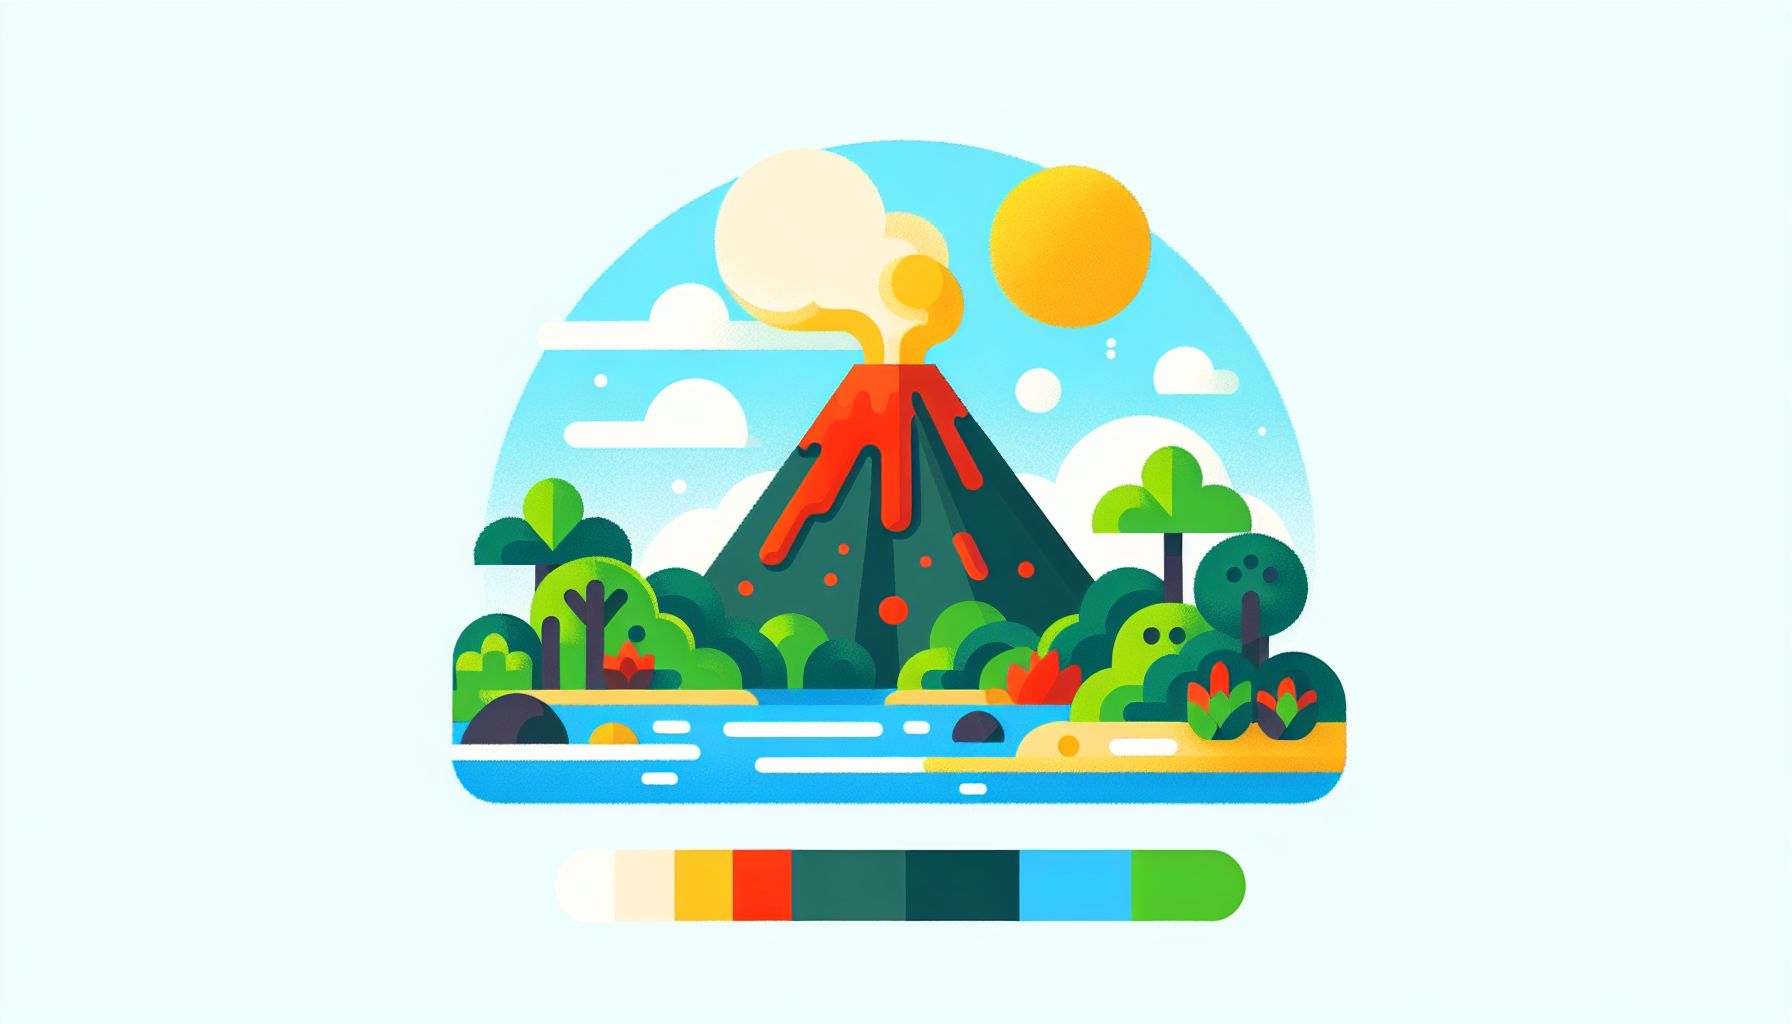 Volcano in flat illustration style and white background, red #f47574, green #88c7a8, yellow #fcc44b, and blue #645bc8 colors.